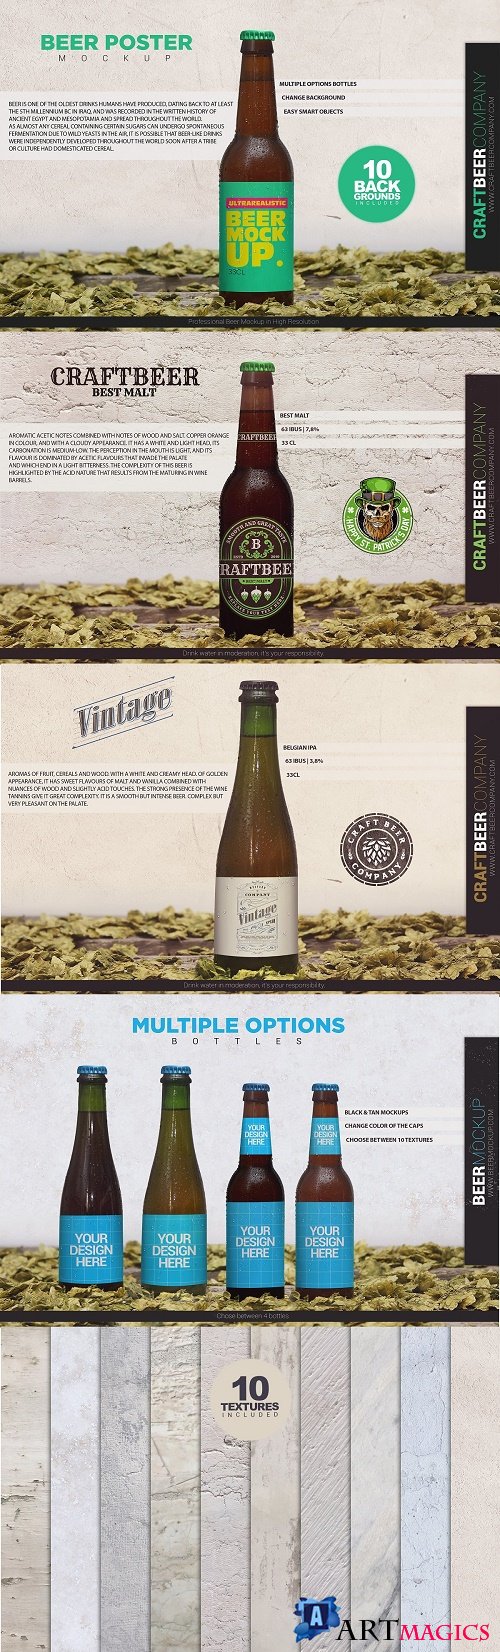 Beer Poster Template - 4012182